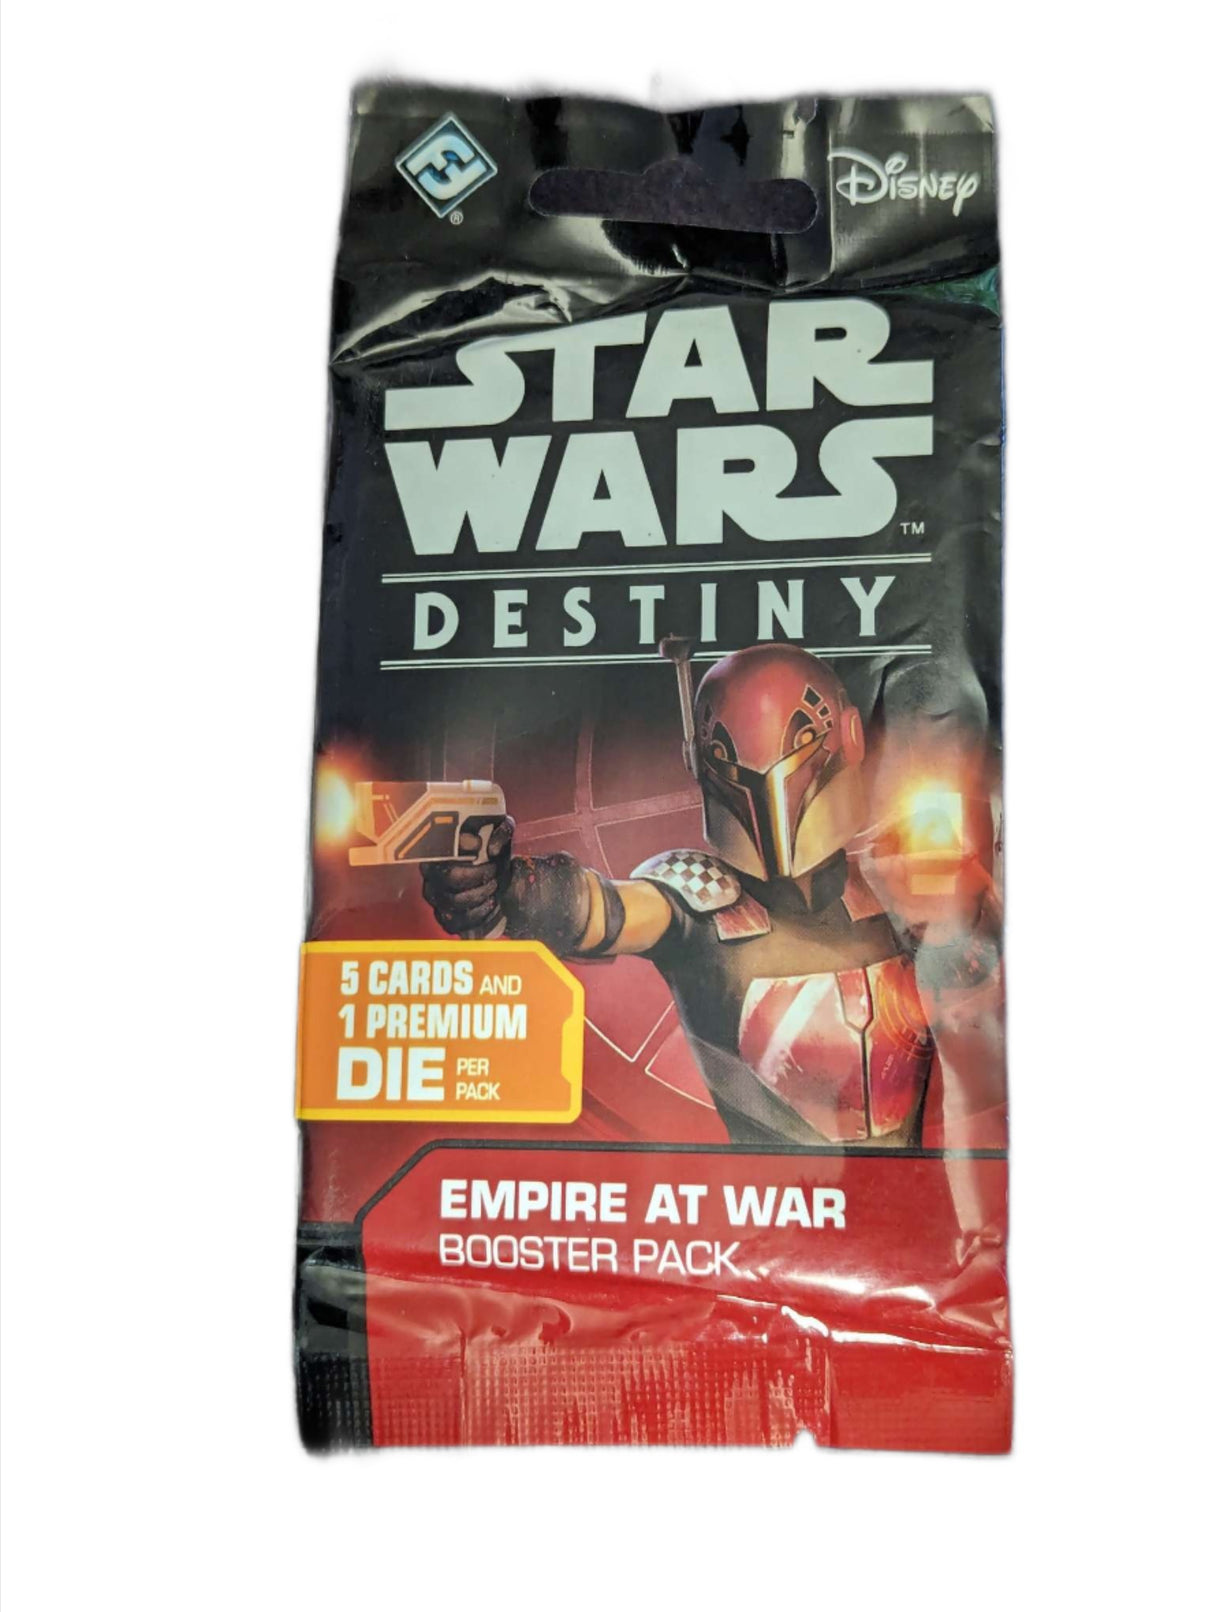 Star Wars Destiny | Empire at War | Mystery Blind Bag | 5 Cards and 1 Premium Dice Booster Pack